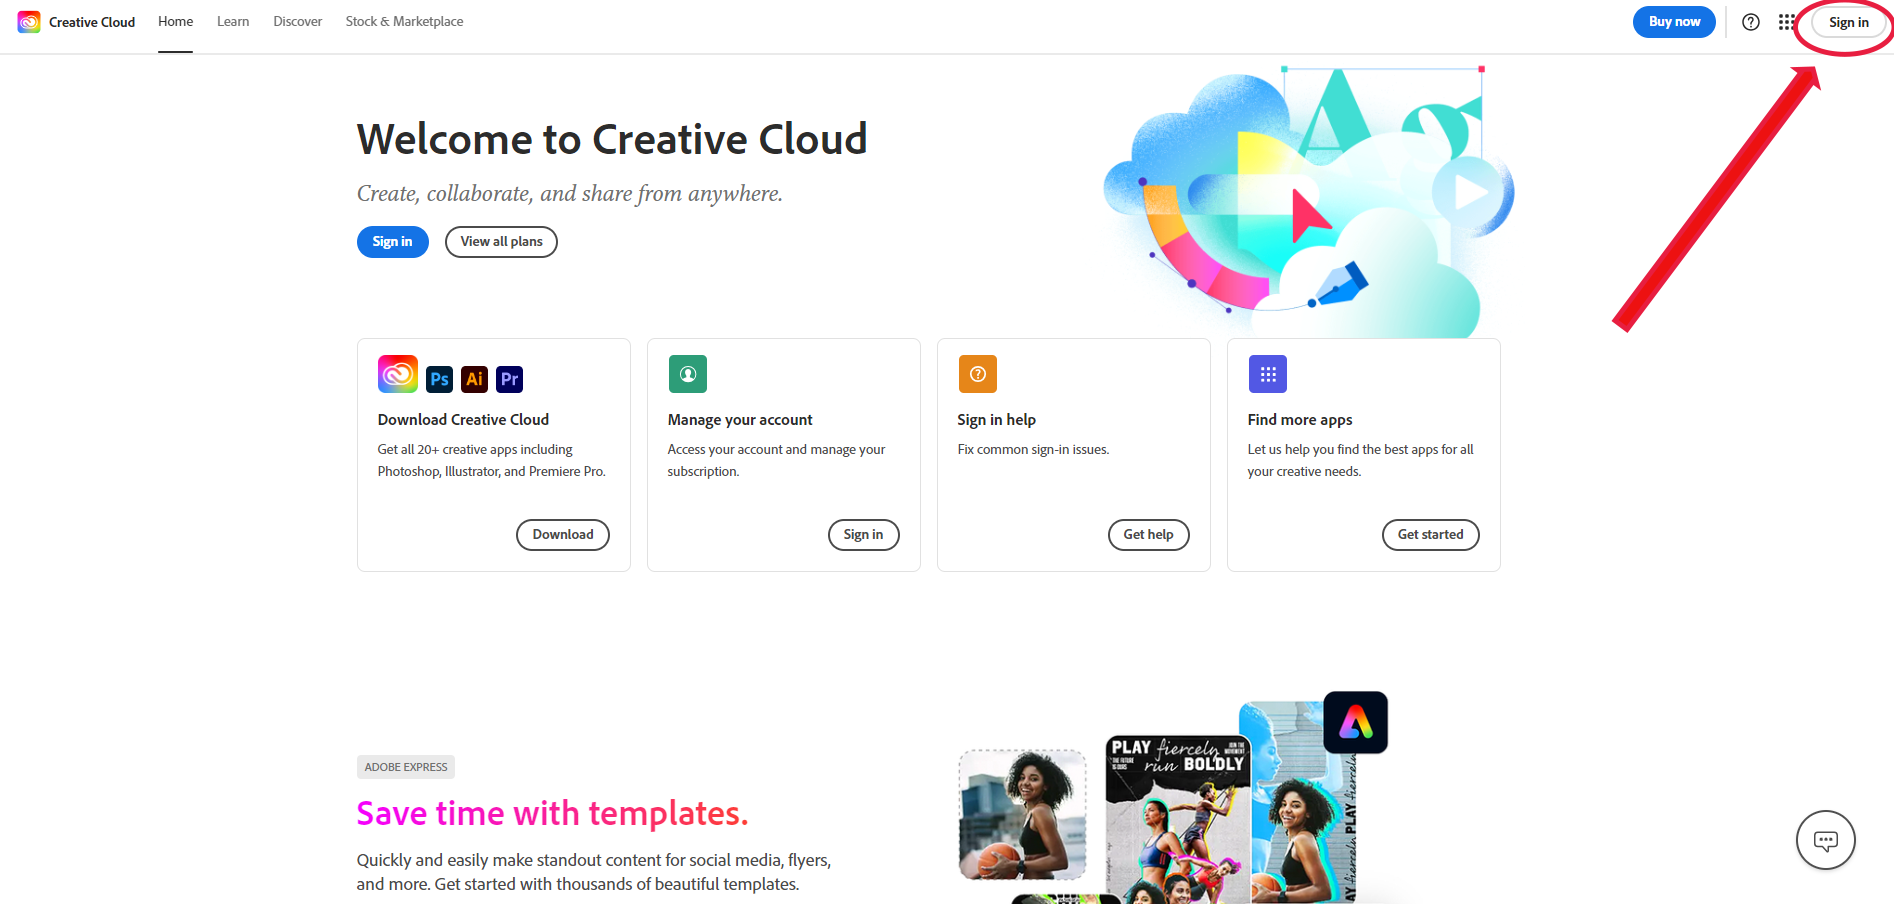 Adobe Creative Cloud home page showing the sign-in button